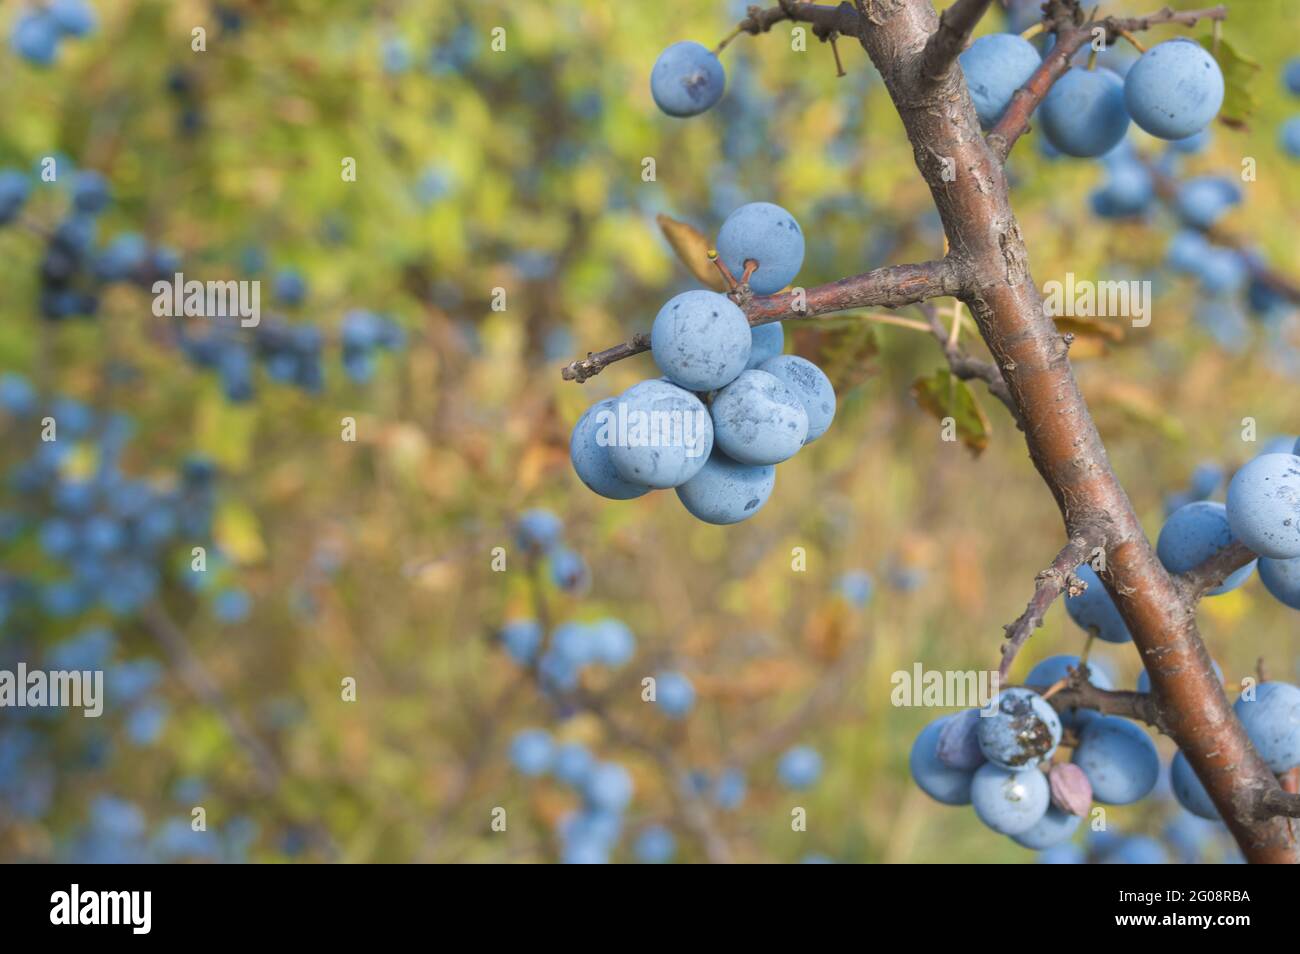 Branch of wild plant prunus spinosa also called blackthorn closeup with blue round fruits  at fall season Stock Photo